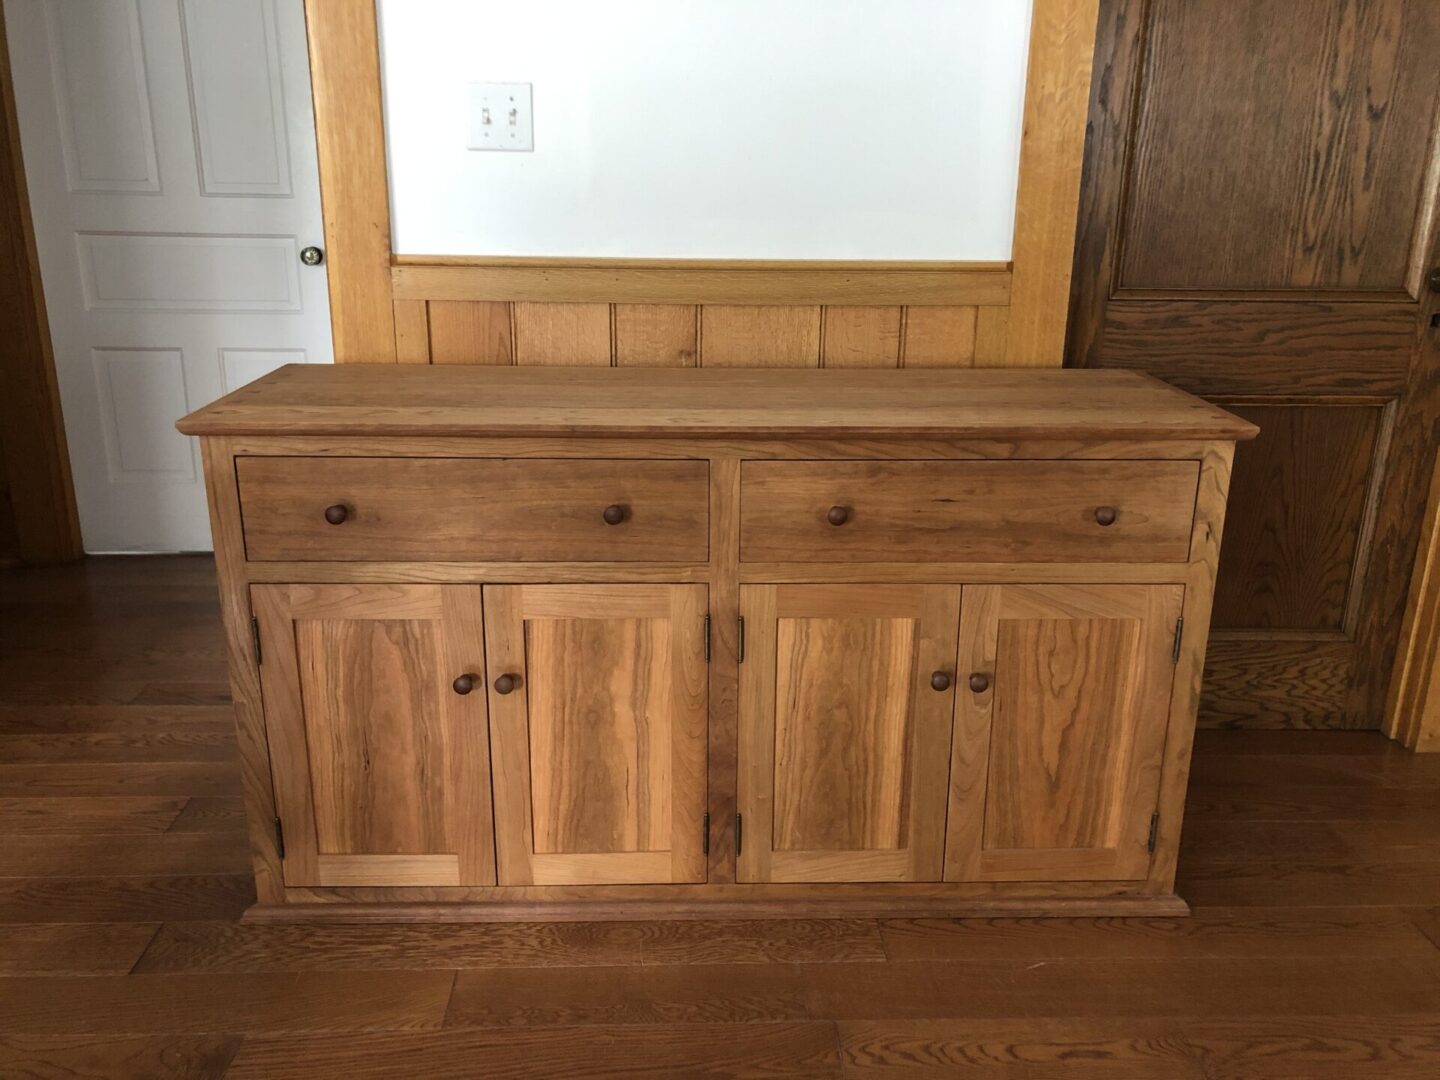 Dovetailed Natural Cherry Sideboard with 3 doors and 2 drawers